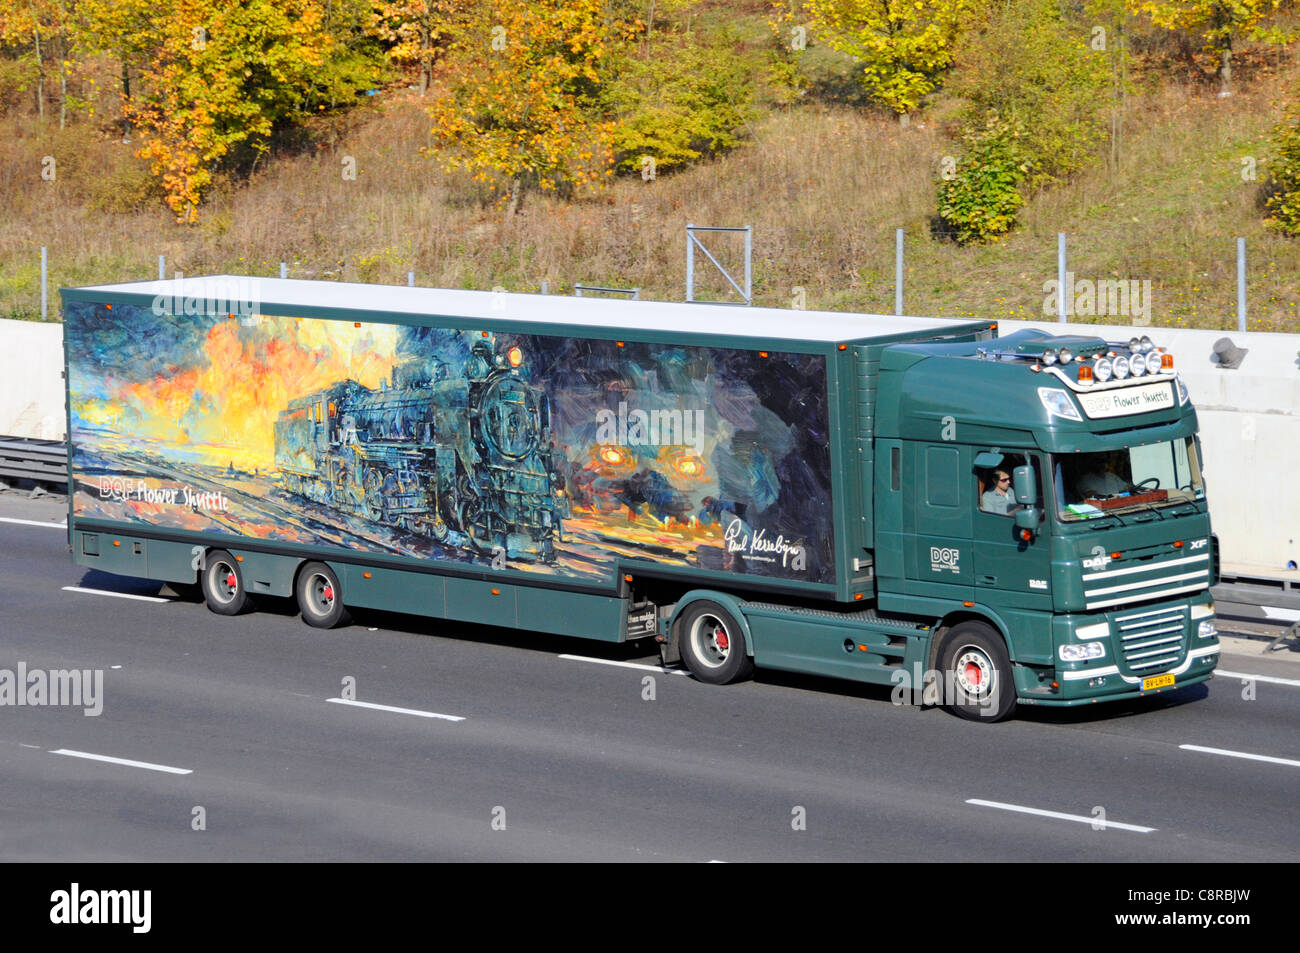 Engine artwork by graphic artist Paul Kerrebijn on side of Dutch flower supplier articulated trailer HGV lorry truck driving motorway road England UK Stock Photo